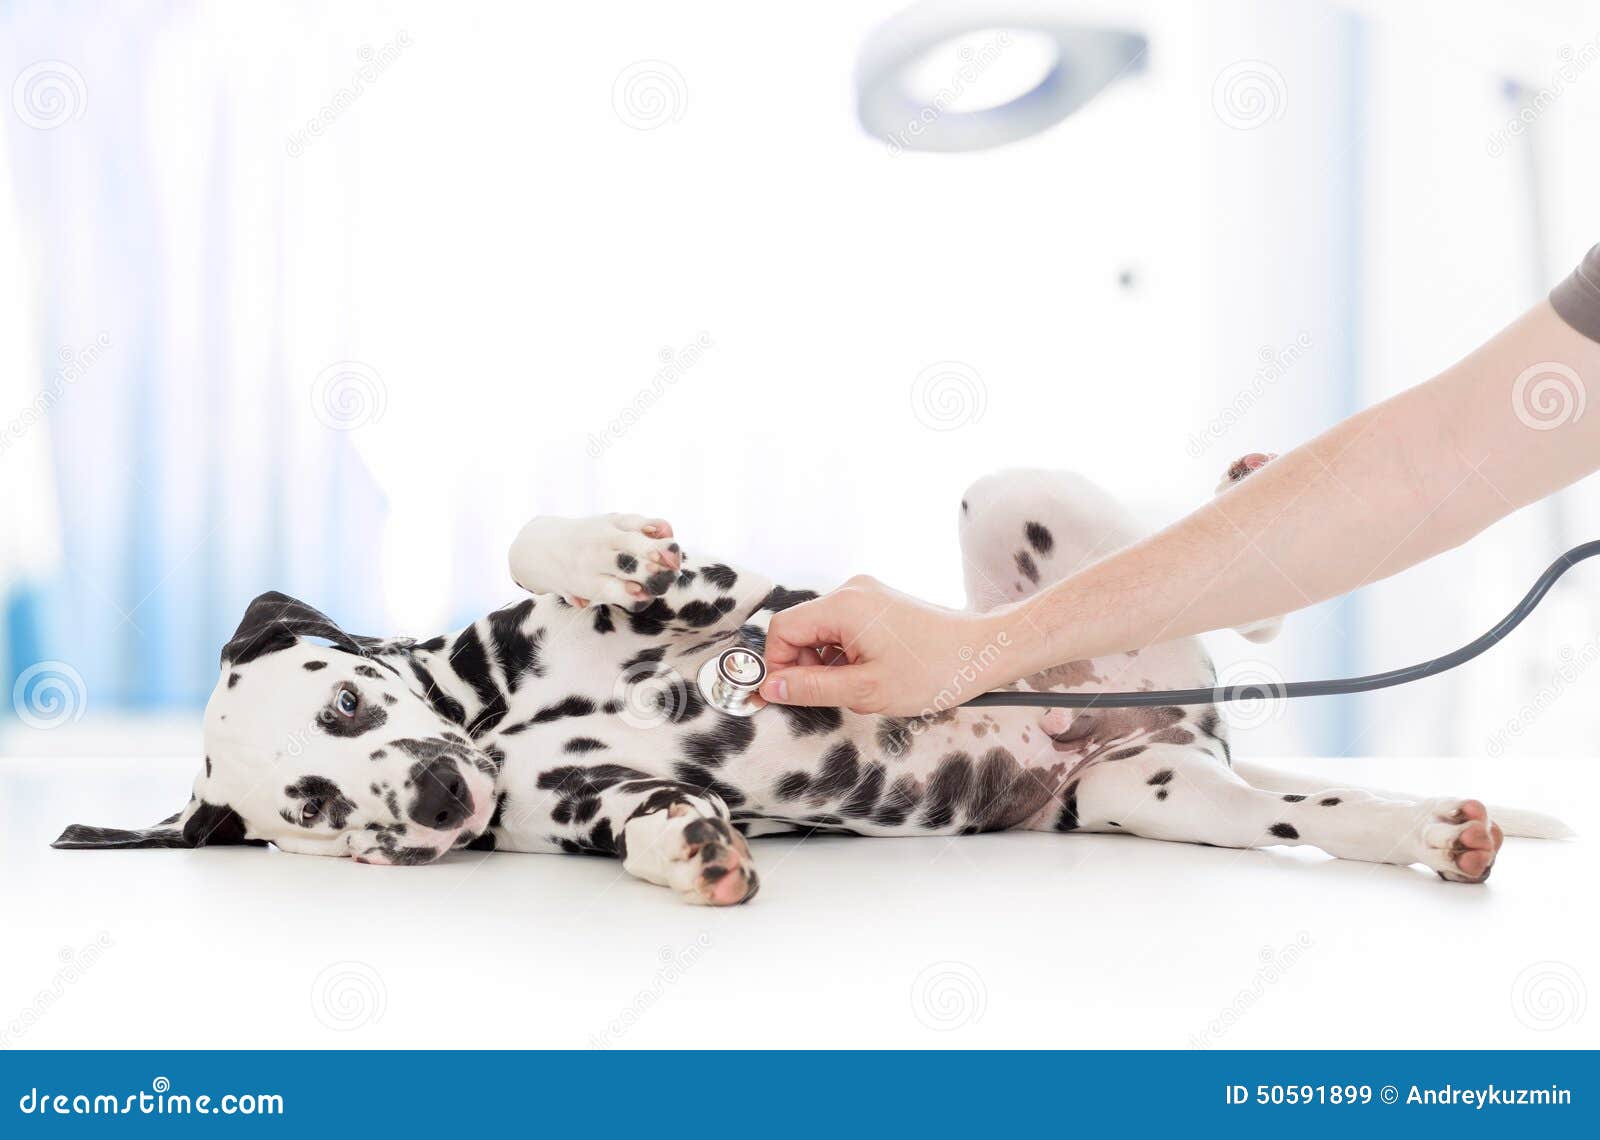 dog examination by veterinary doctor with